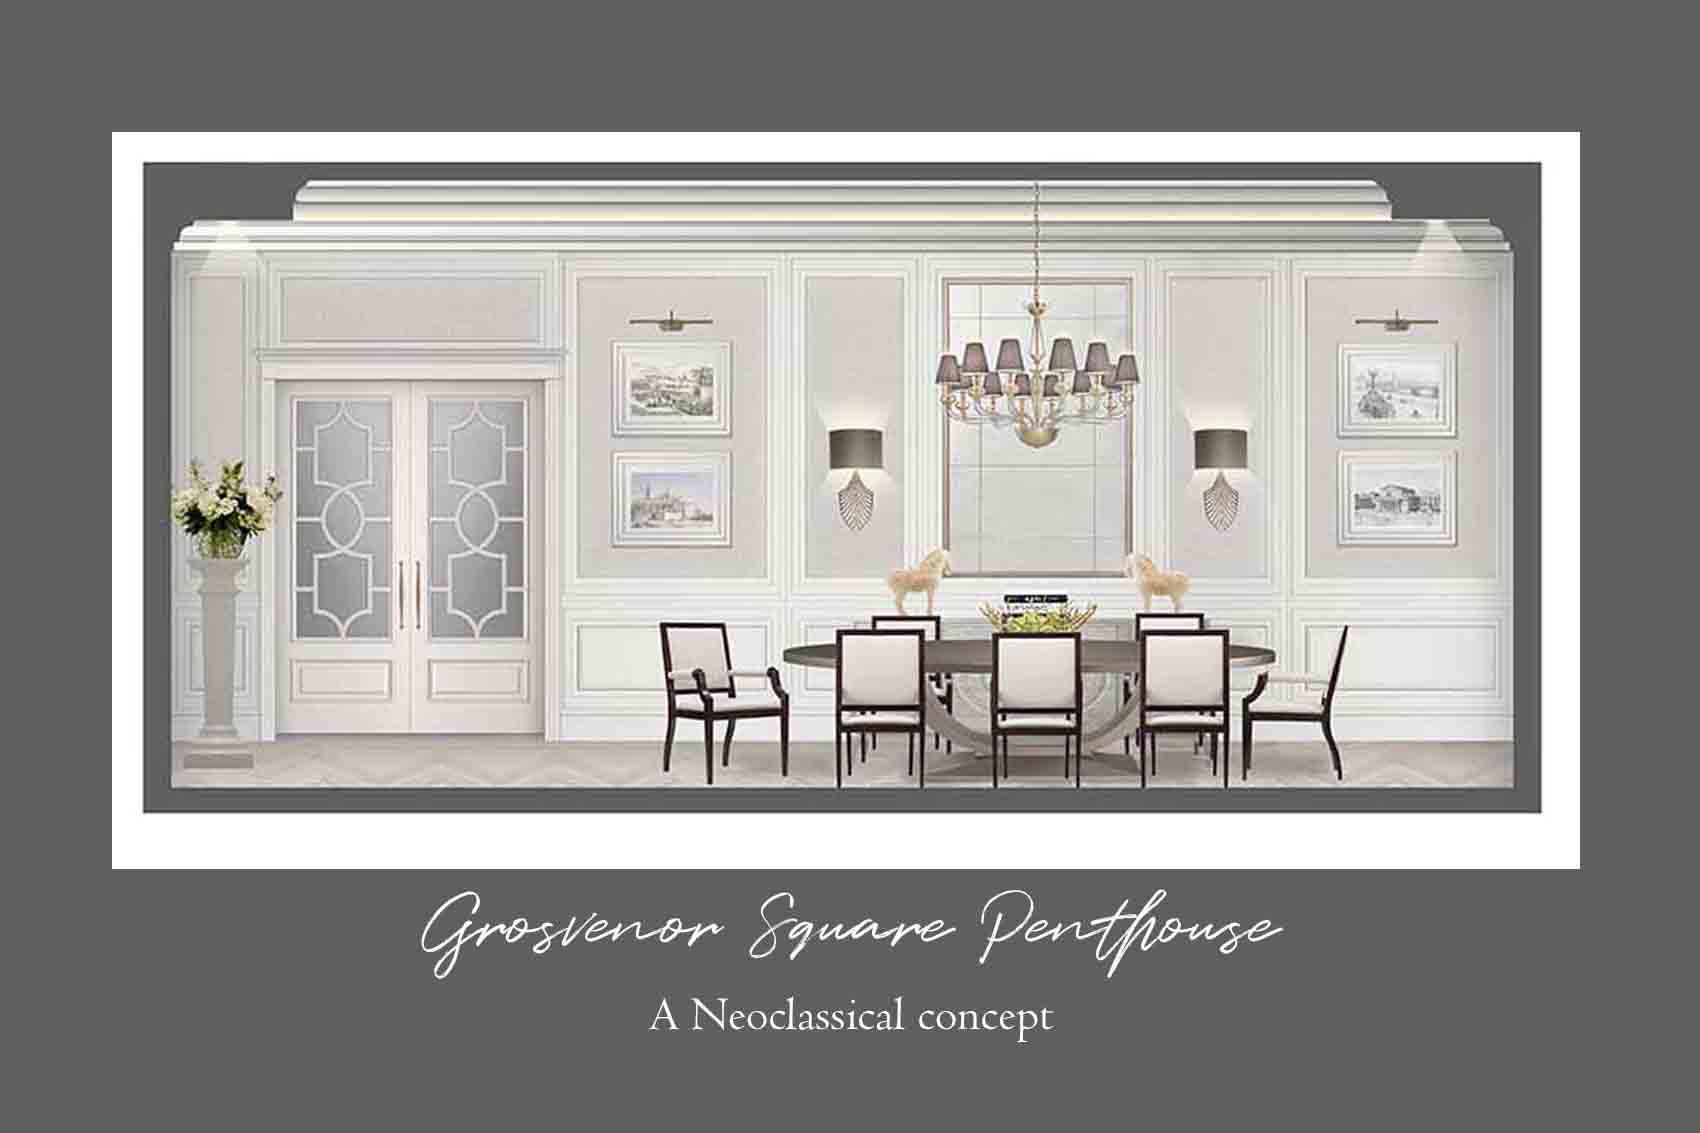 Colour rendered elevation of dining room, panelled walls, classic dark furniture